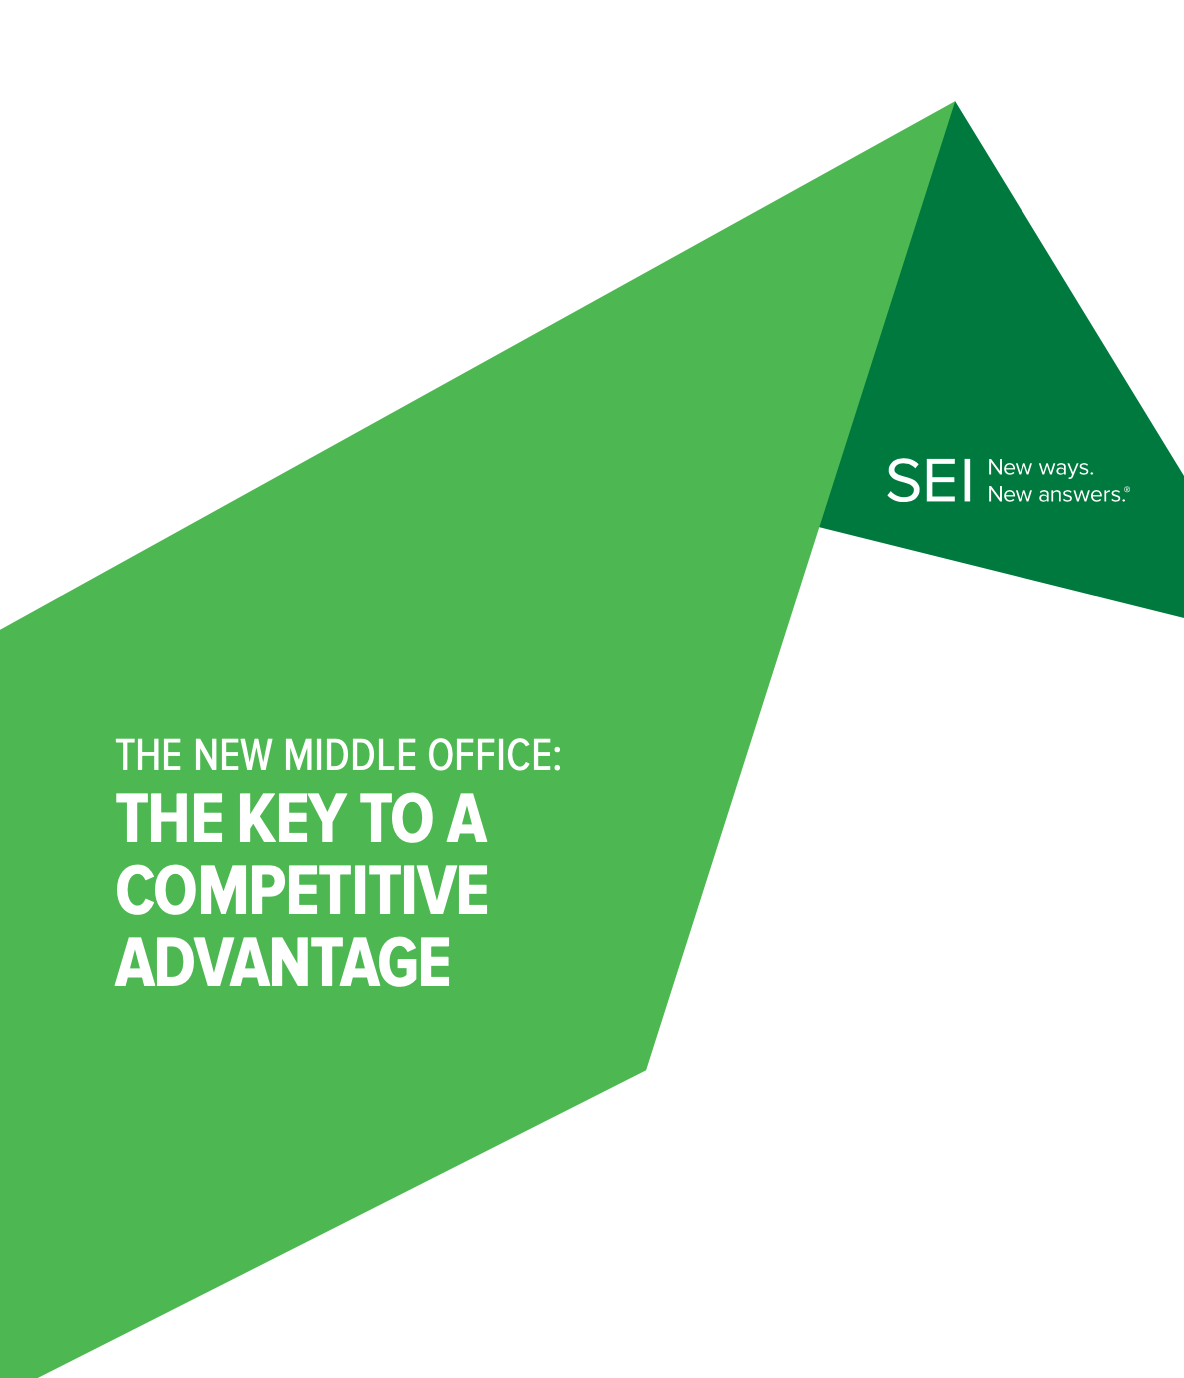 SEI - The new middle office: The key to a competitive advantage